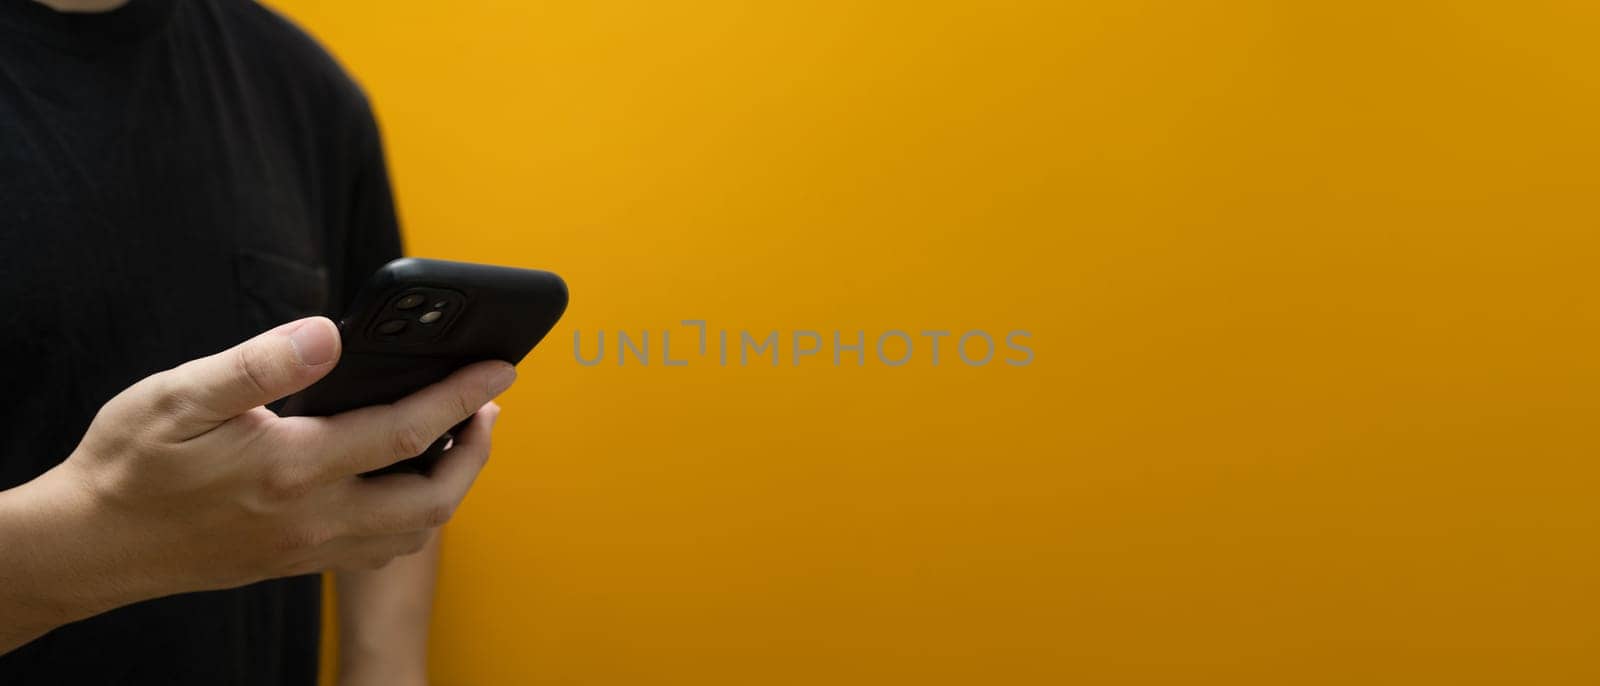 Man hand holding smartphone isolated on yellow background with copy space for advertise text.